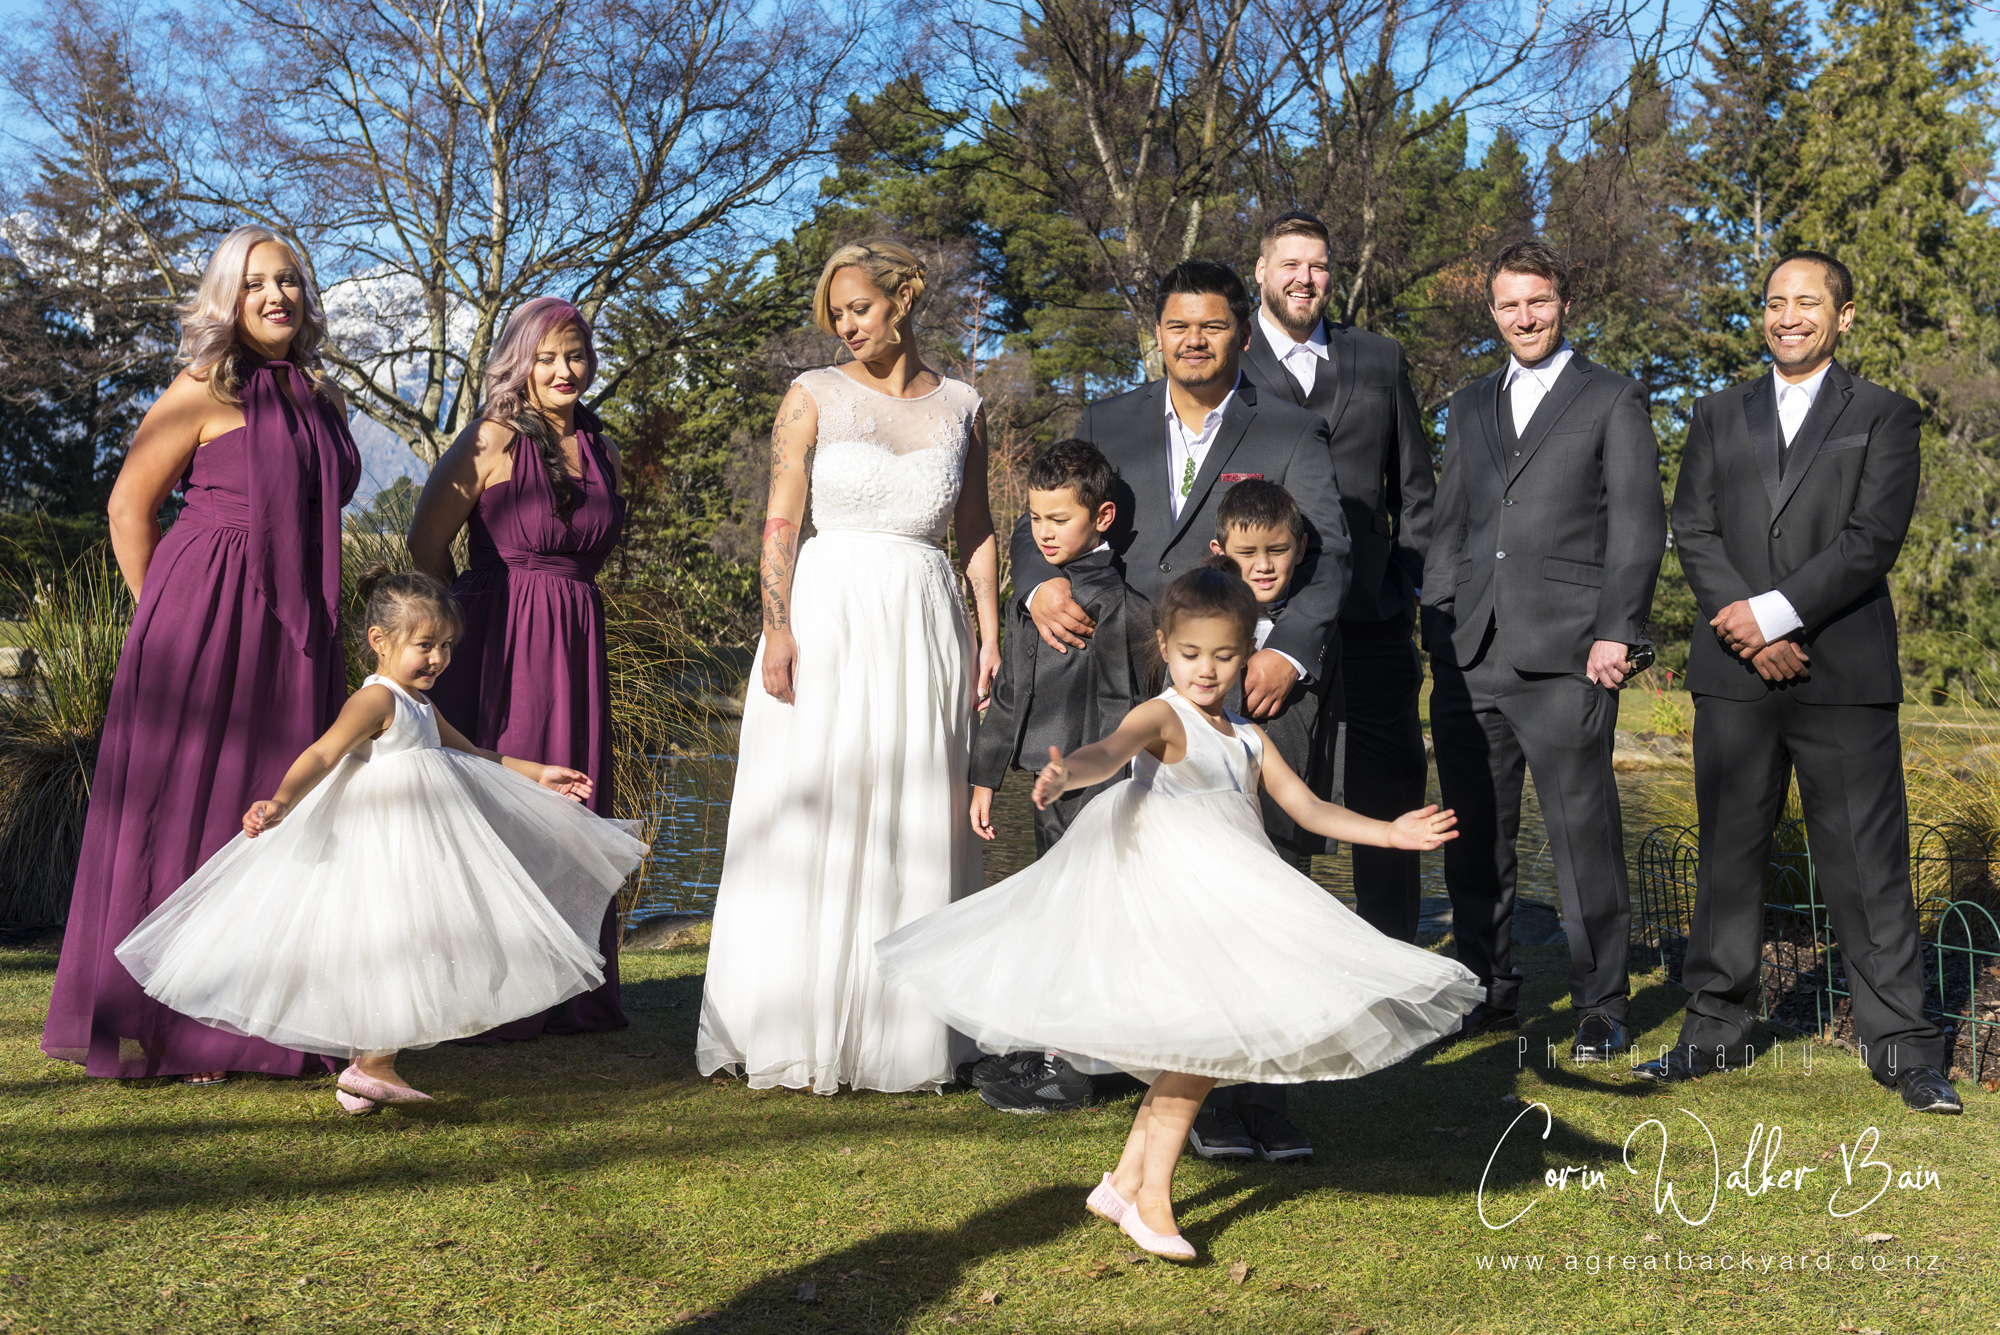 Swirling at Jah and Teri's Queenstown wedding by New Zealand wedding photographer Corin Walker Bain of a great backyard